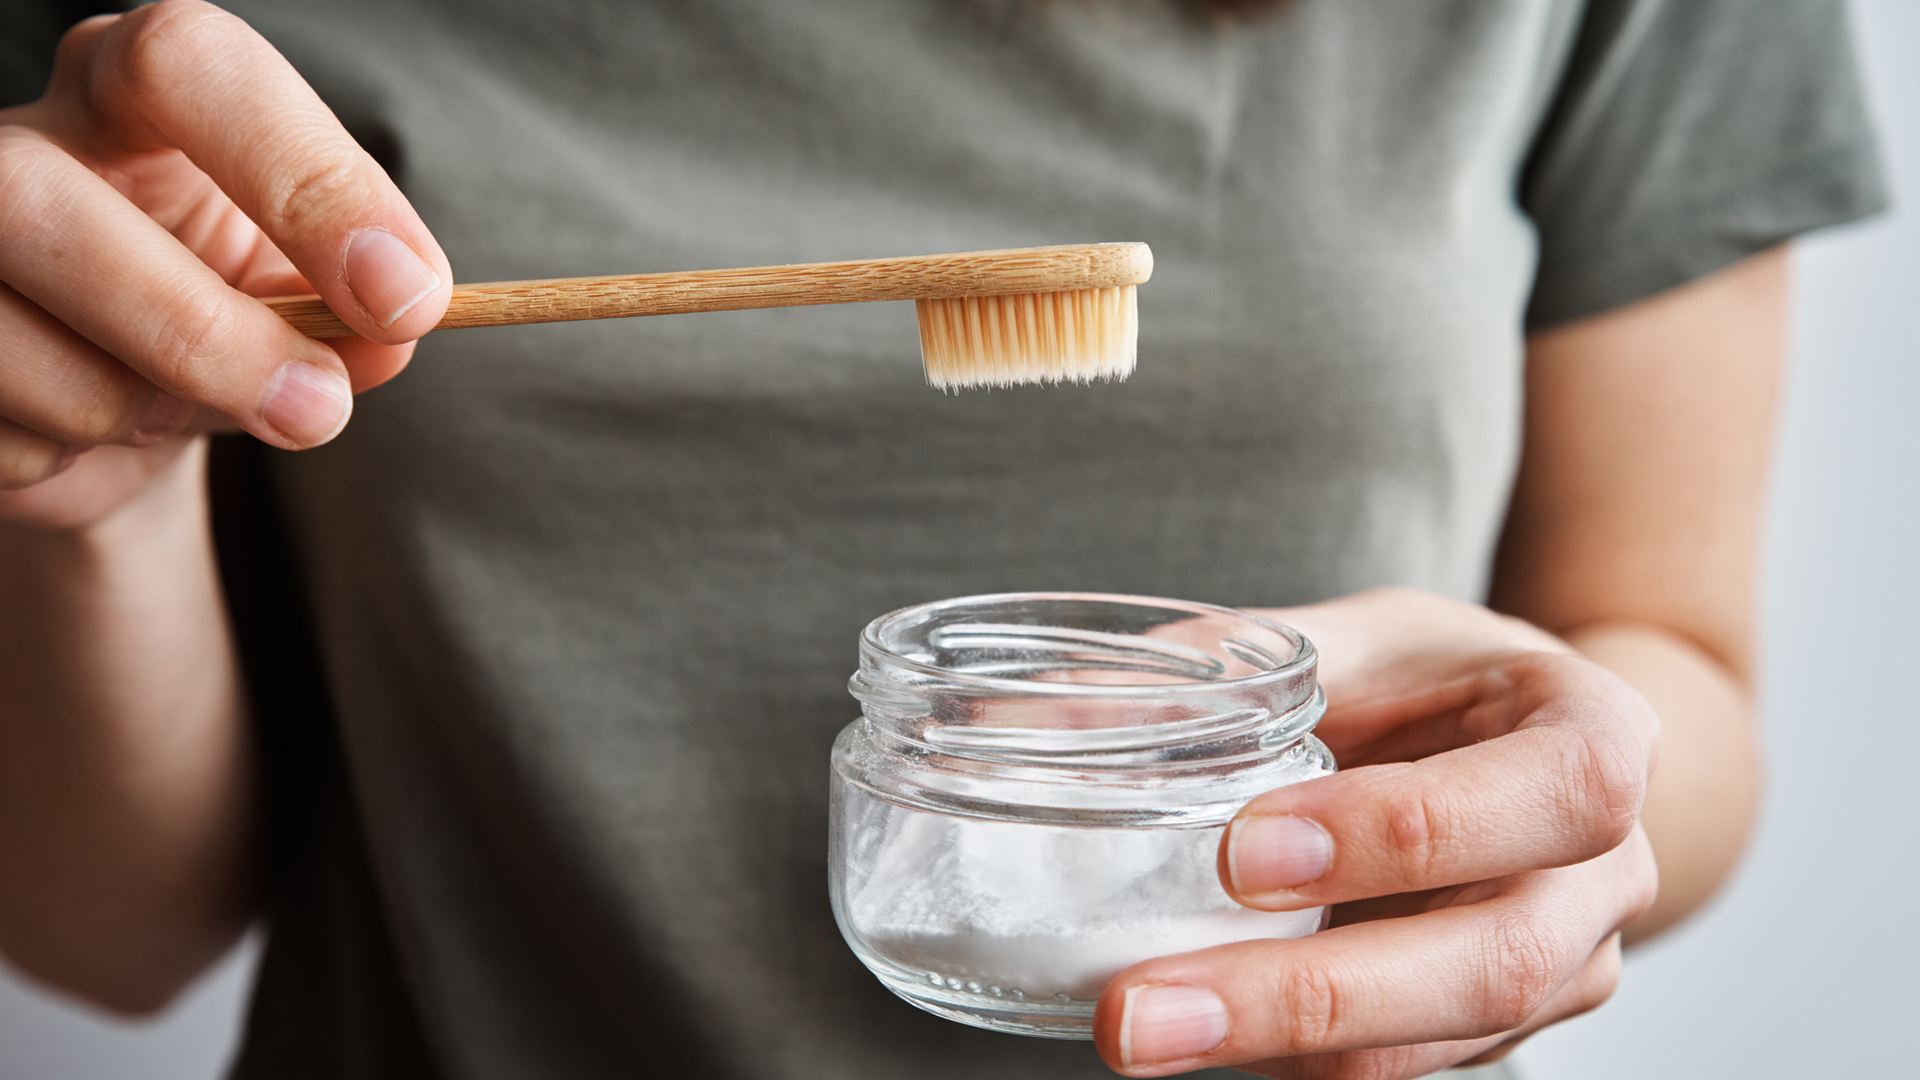 A woman who uses baking soda to naturally whiten her teeth